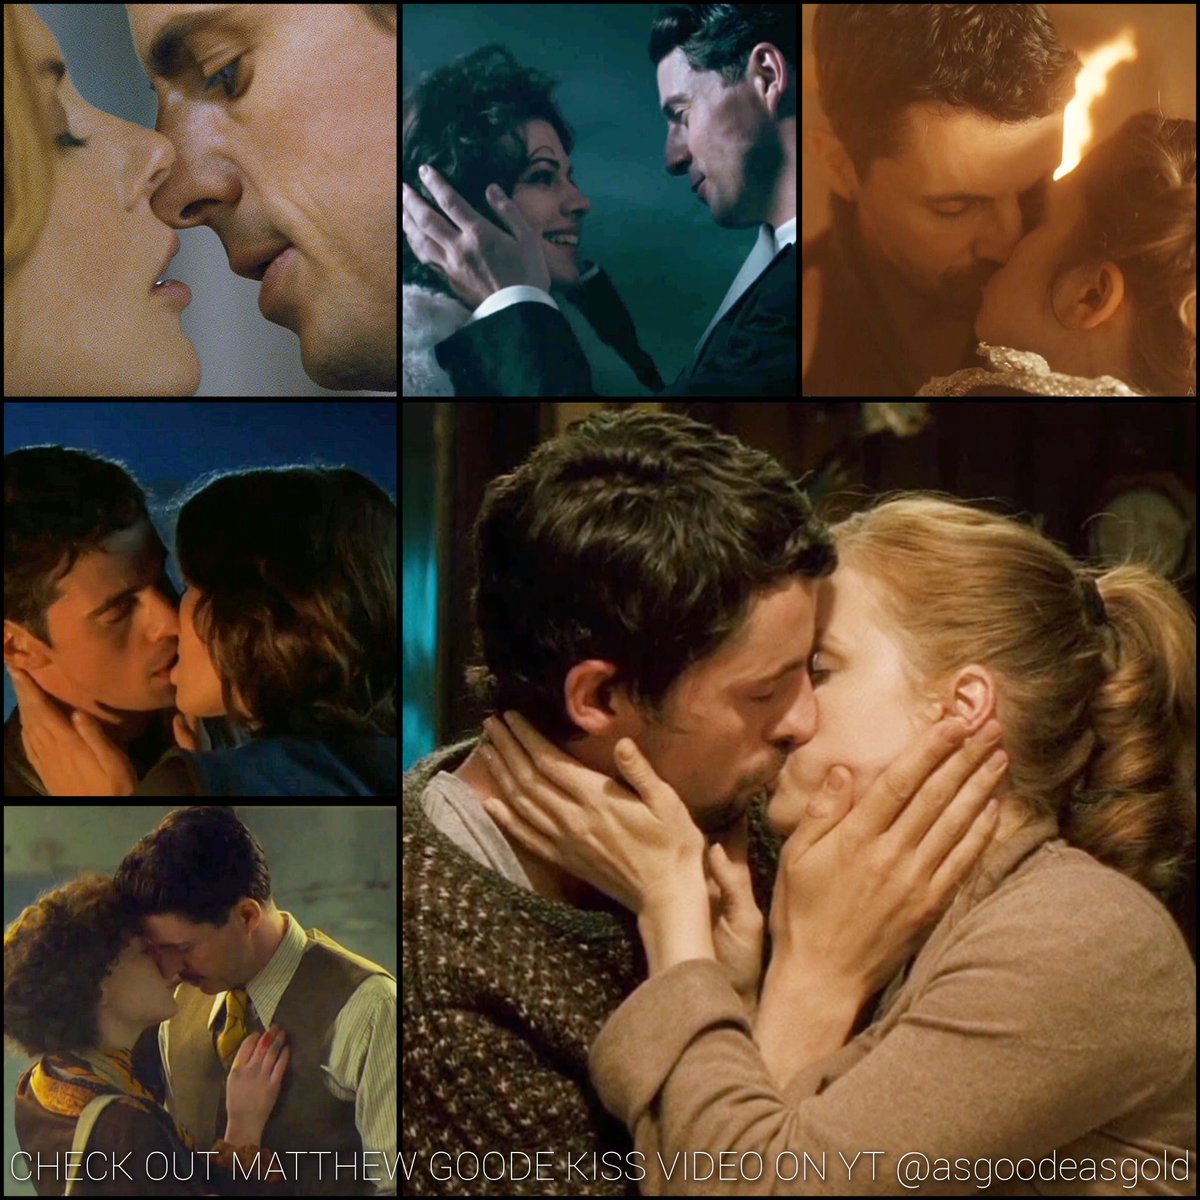 It's #NationalKissingDay 💋 in the US, but I don't see why the rest of the world shouldn't partake! Reposting my #matthewgoode swooney kisses video 💗
CLICK ON LINK ➡️ youtu.be/qA34OFzMPl4